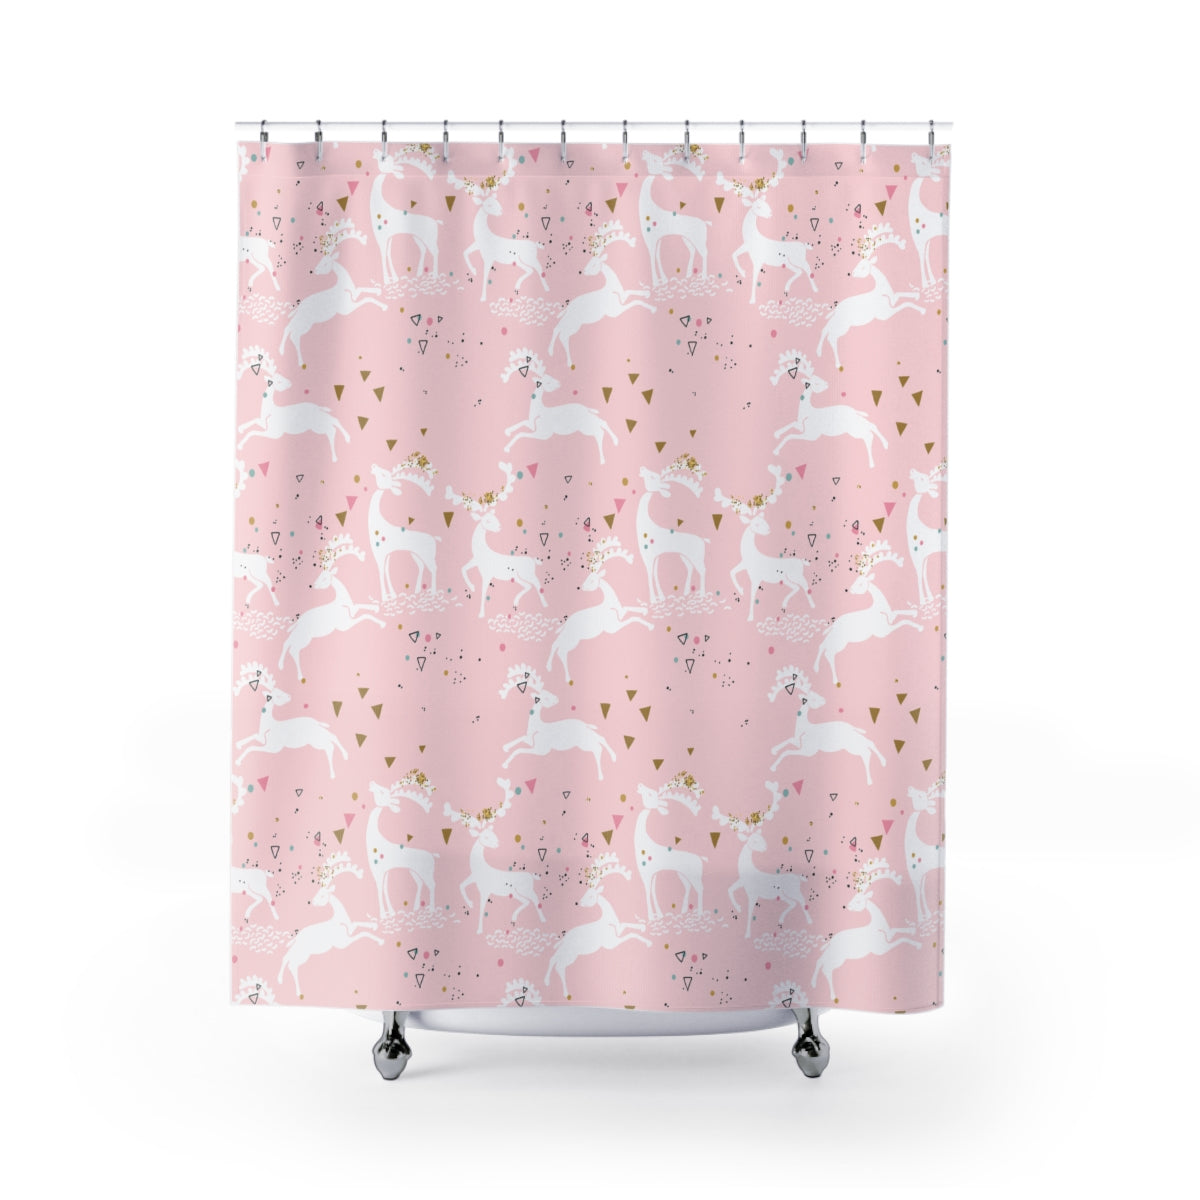 Magical Reindeers Shower Curtain